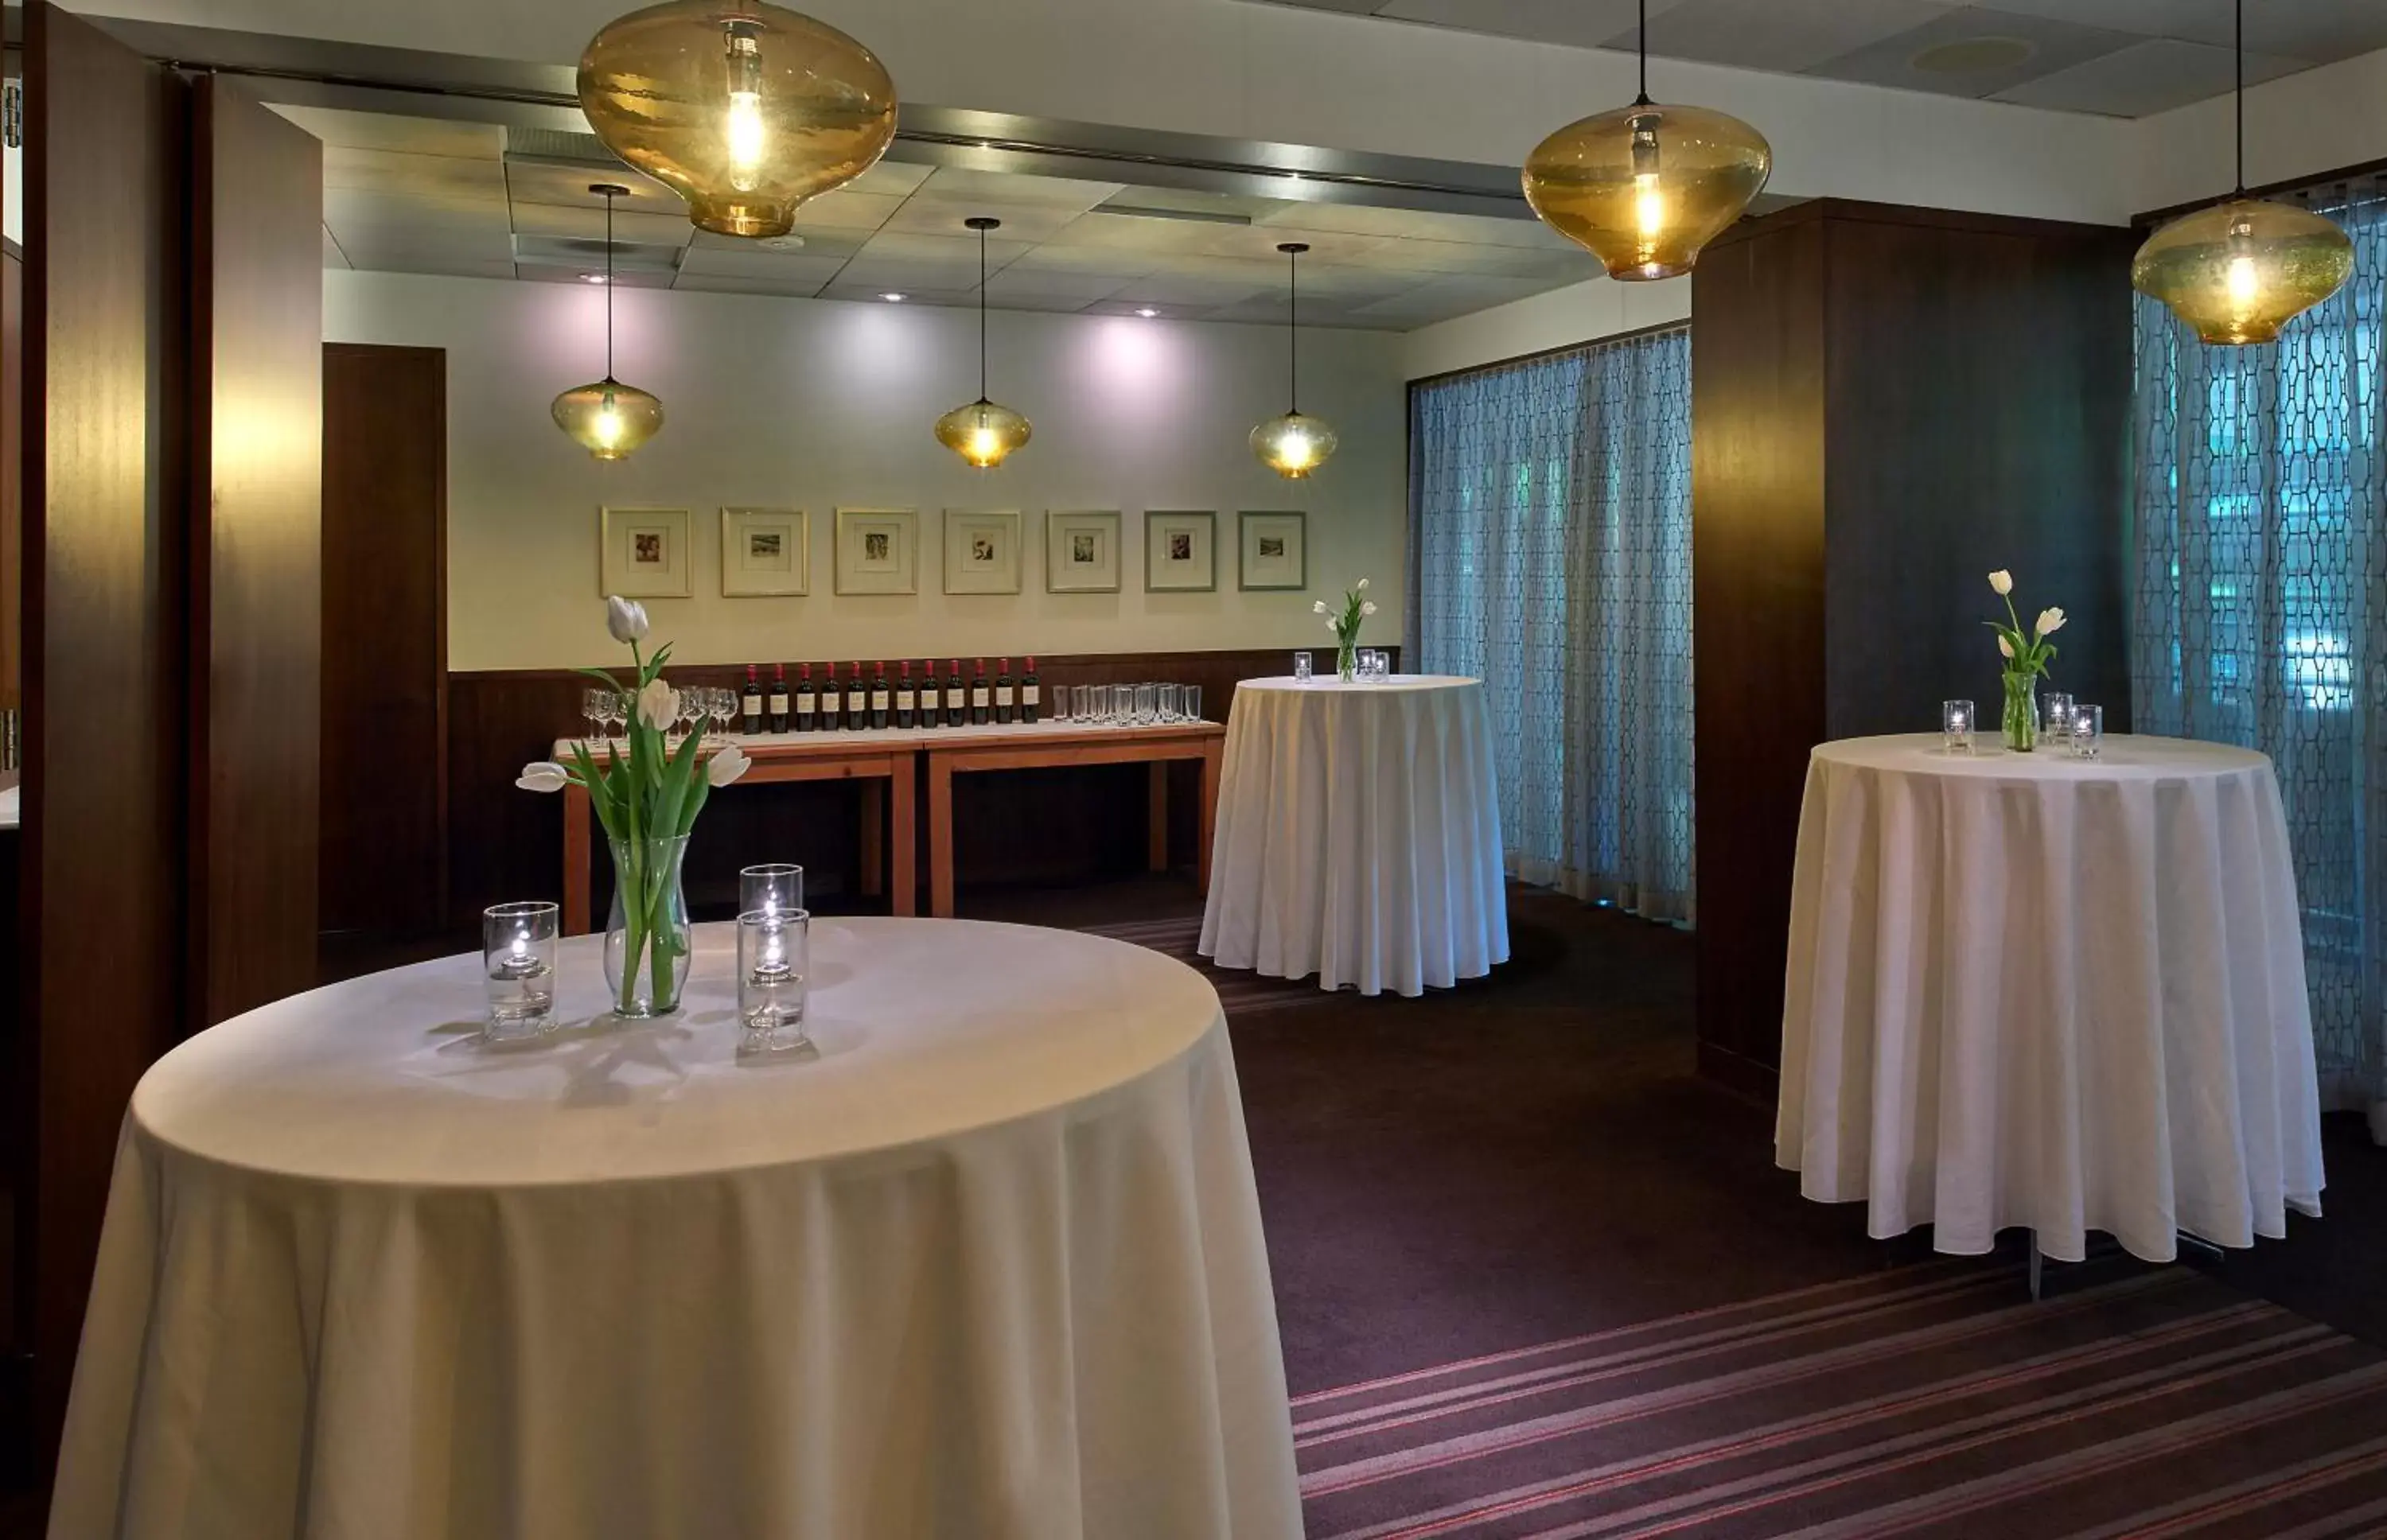 Banquet/Function facilities in The Hotel Zags Portland